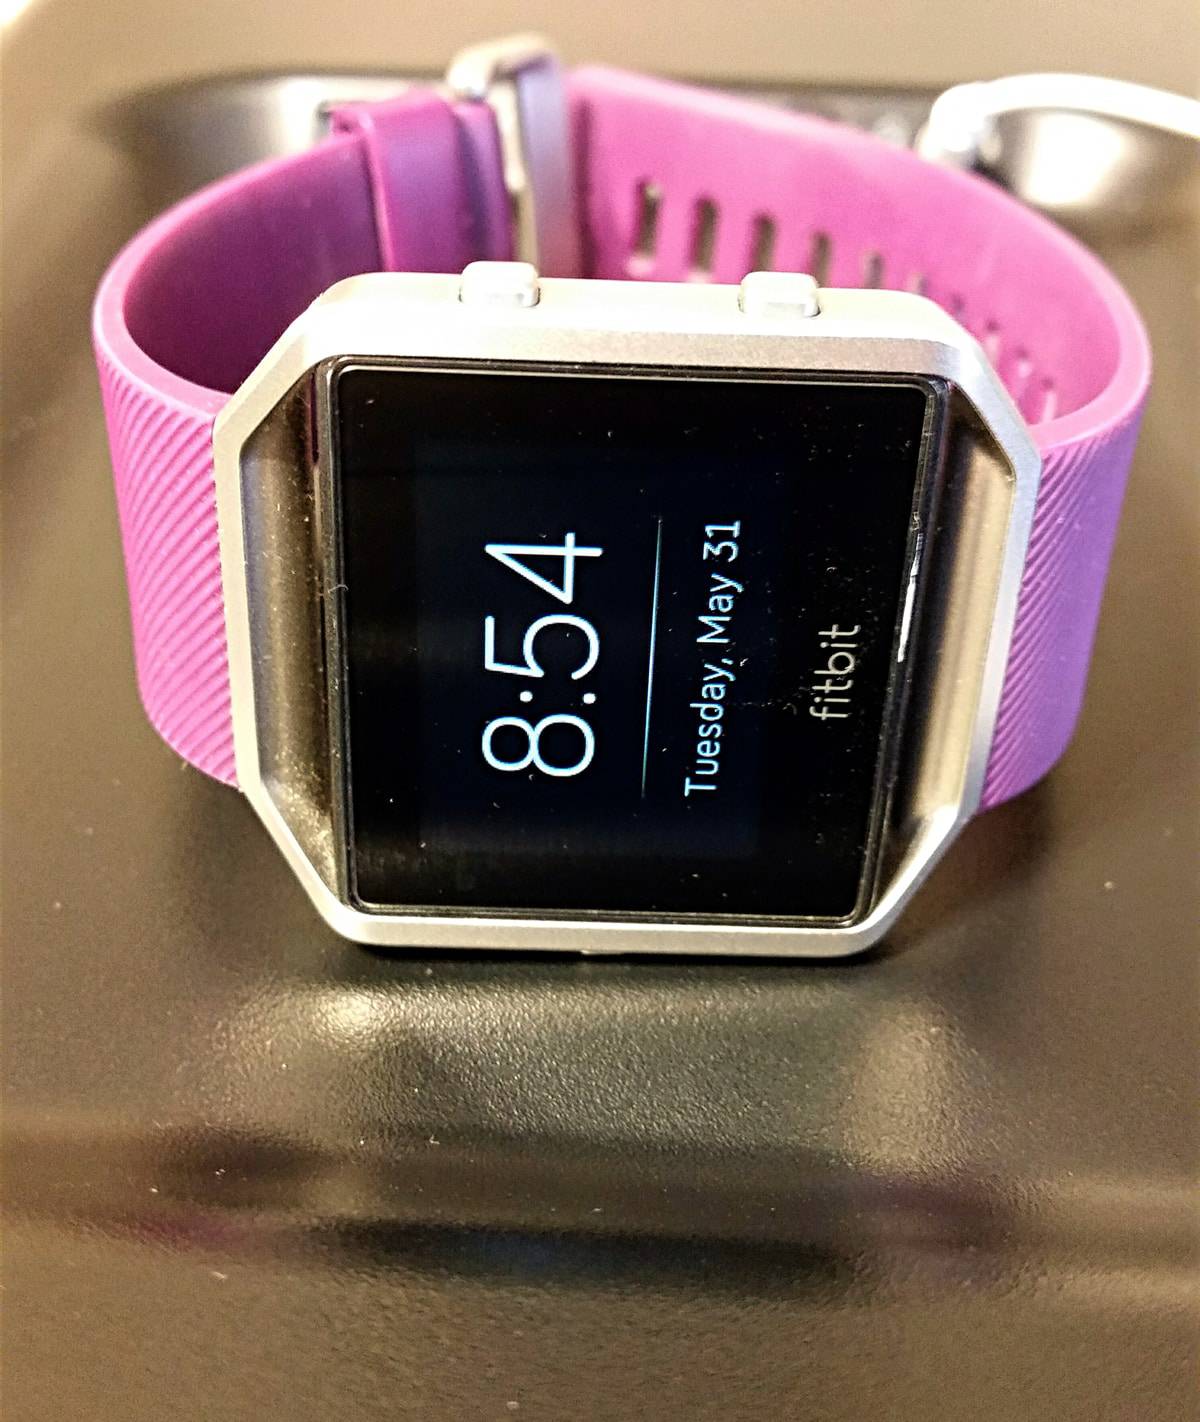 A photo of a Fitbit Blaze with a pink wristband sitting on a table.